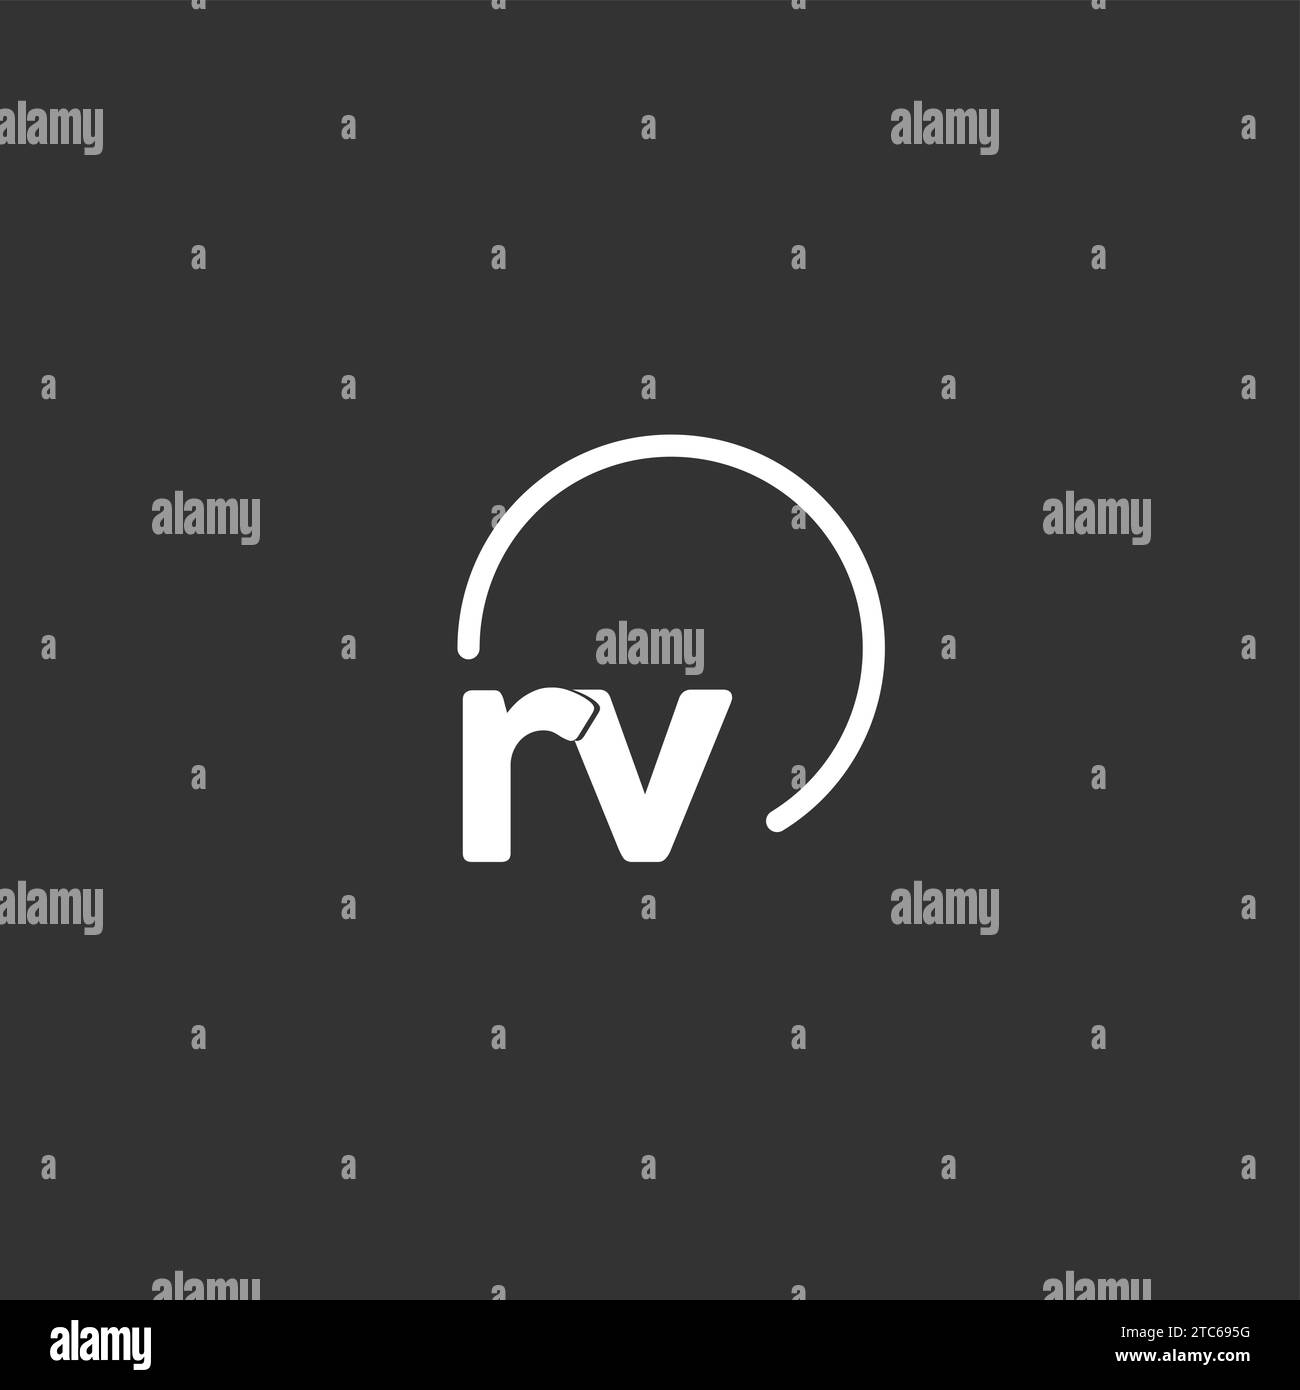 RV initial logo with rounded circle vector graphic Stock Vector